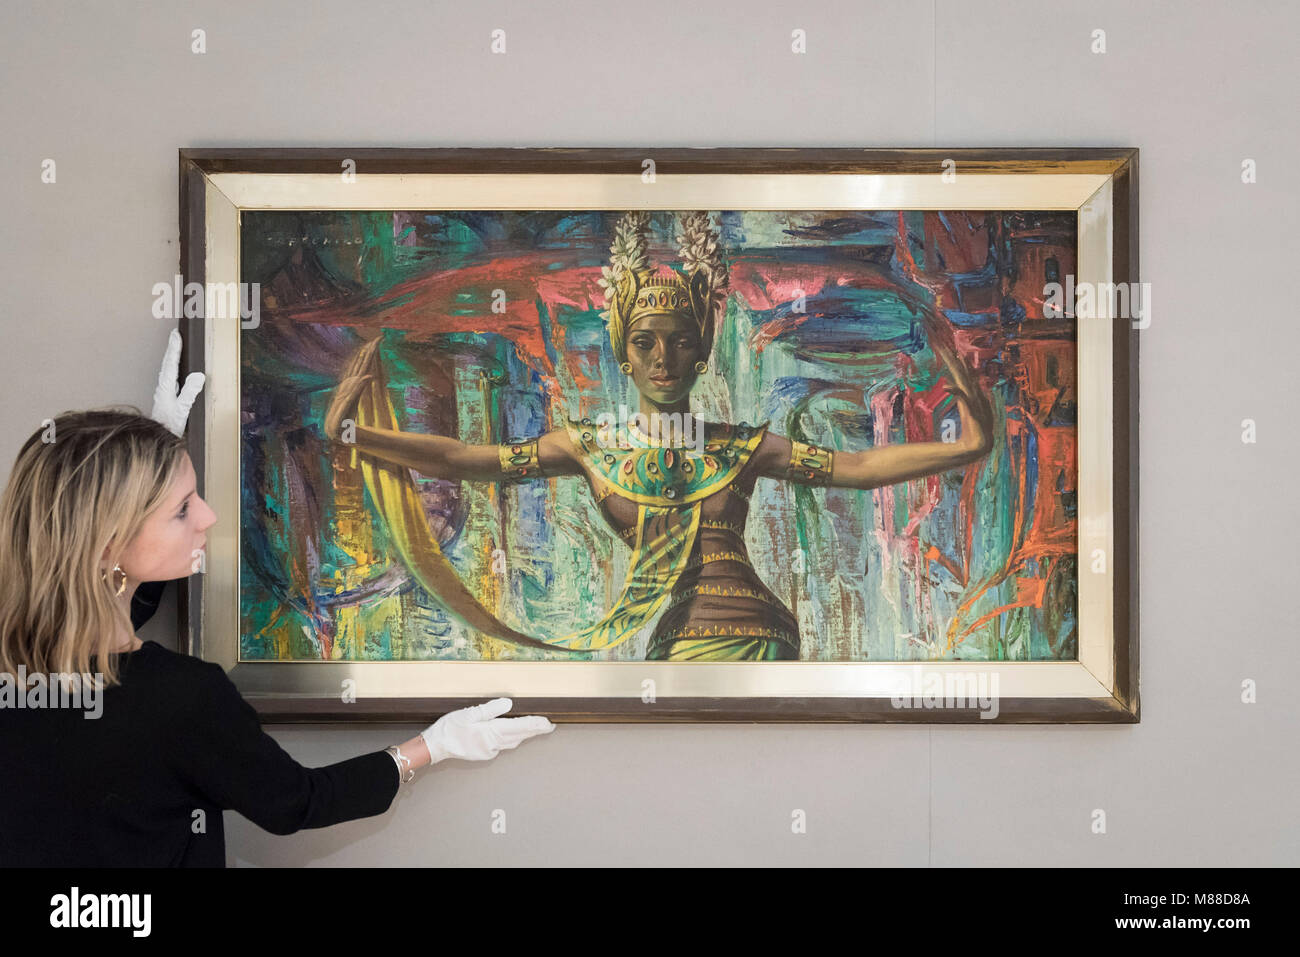 London, UK.  16 March 2018.  A staff member presents 'Balinese Dancer' by Vladimir Griegorovich Tretchikoff (Est. £25,000 - 35,000).  Preview of South African art at Bonhams, New Bond Street which will be sold at auction on 21 March 2018.  The sale features works by renowned South African artists including Irma Stern, Gerard Sekoto and Alexis Preller. Credit: Stephen Chung / Alamy Live News Stock Photo